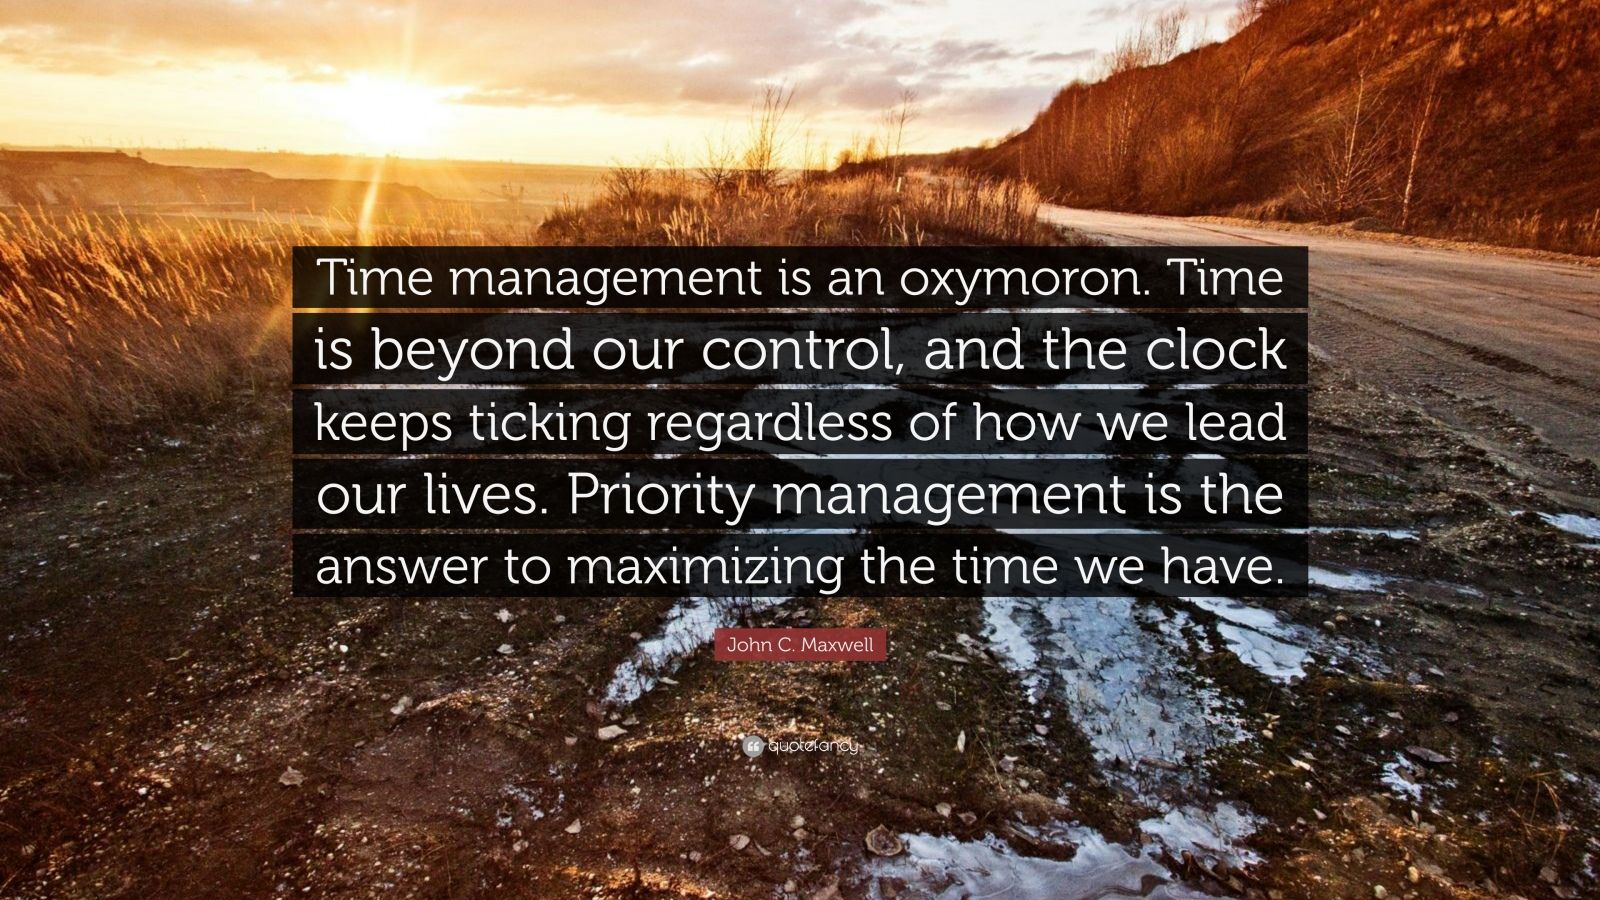 John C. Maxwell Quote: “Time management is an oxymoron. Time is beyond